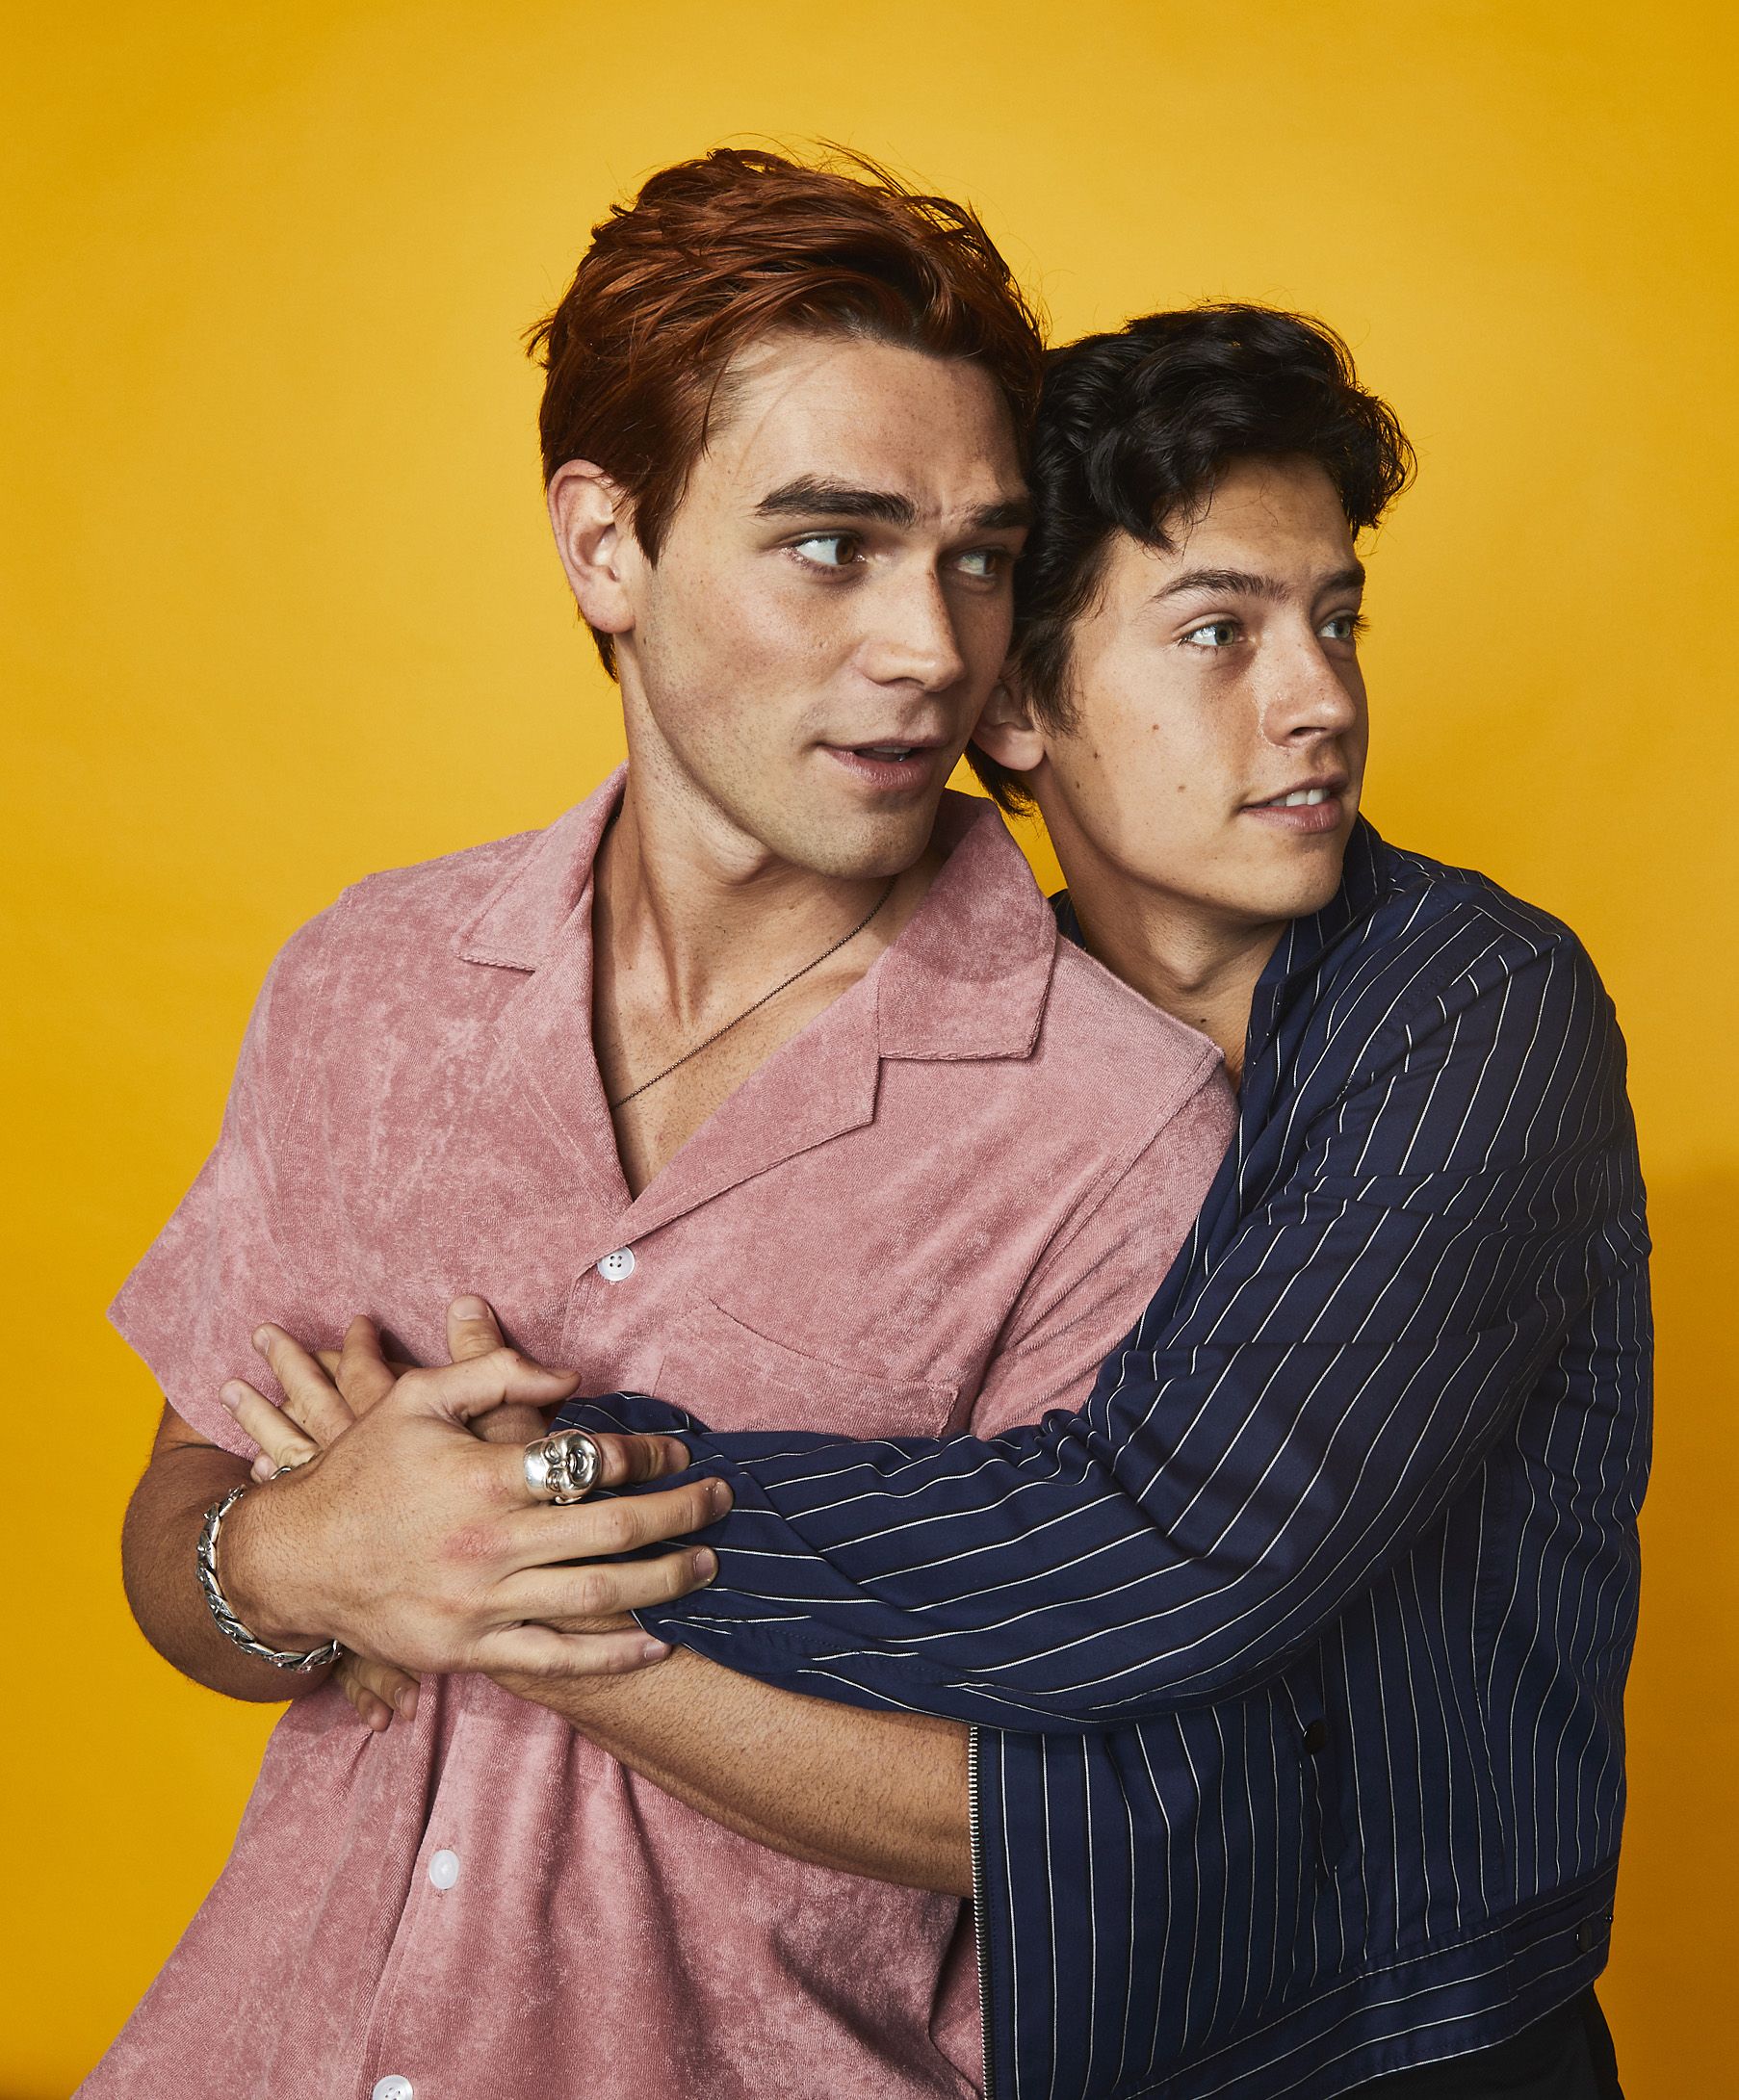 See the Riverdale Cast Lili Reinhart, Cole Sprouse, and Camila Mendes' Comic Con 2019 Portraits